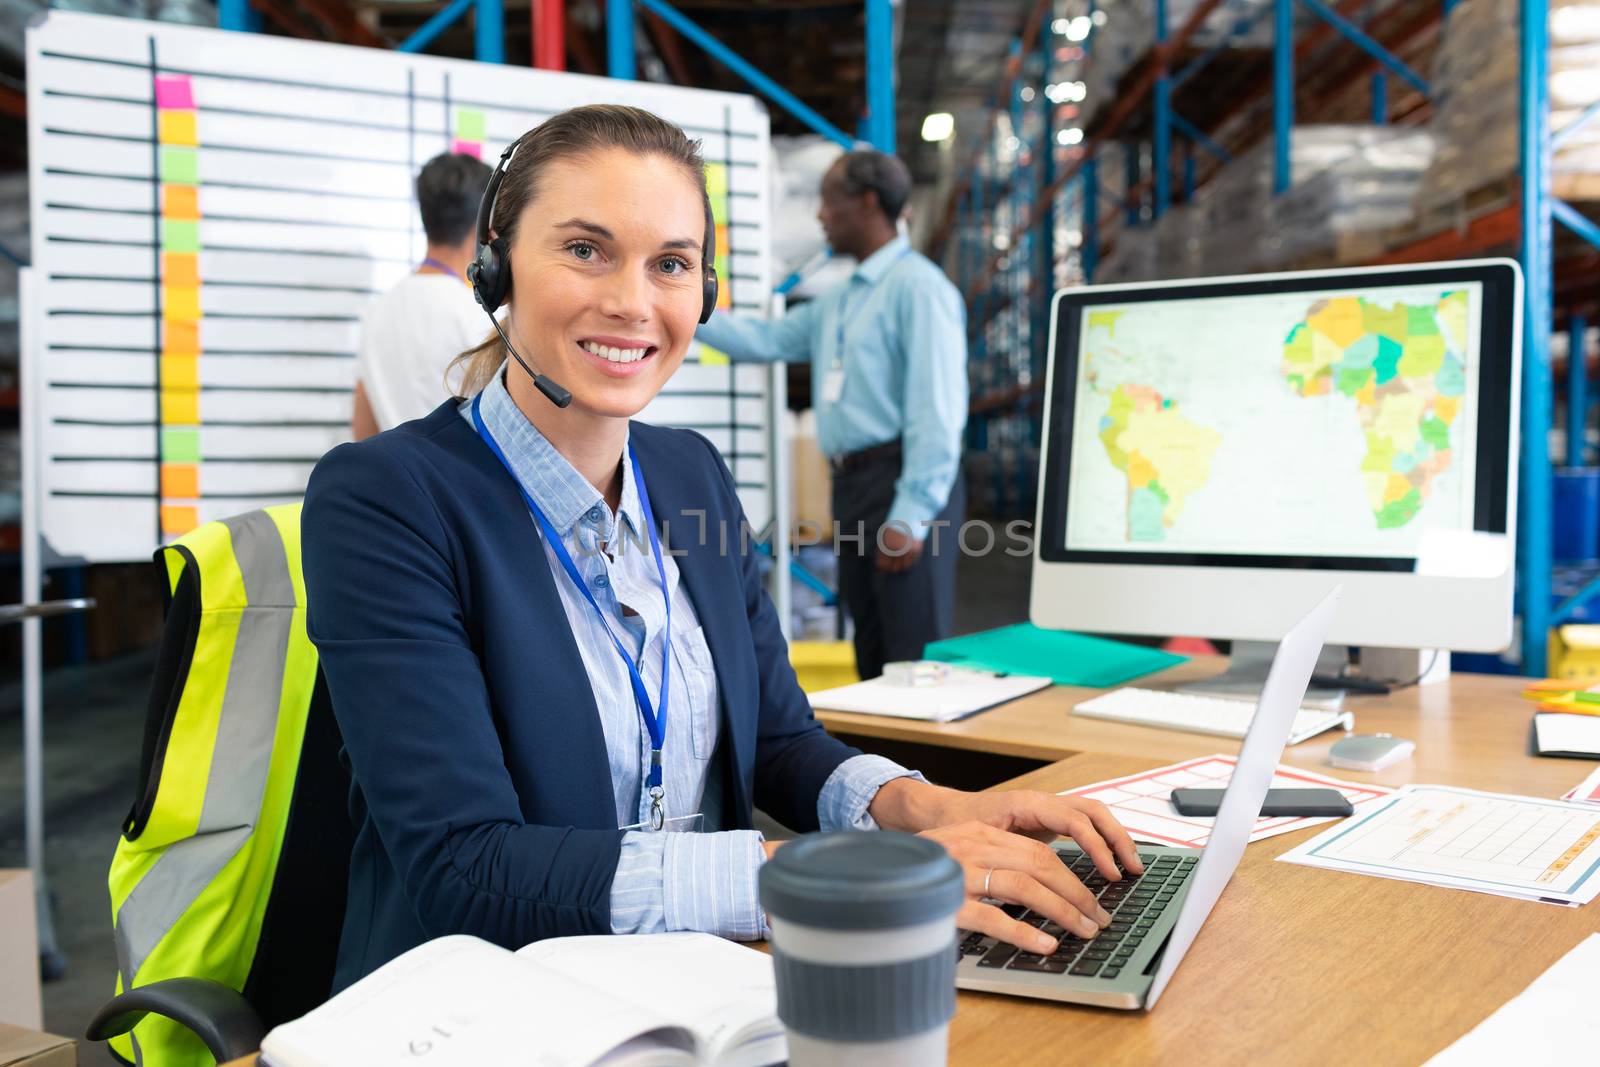 Female manager with headset using laptop at desk in warehouse by Wavebreakmedia